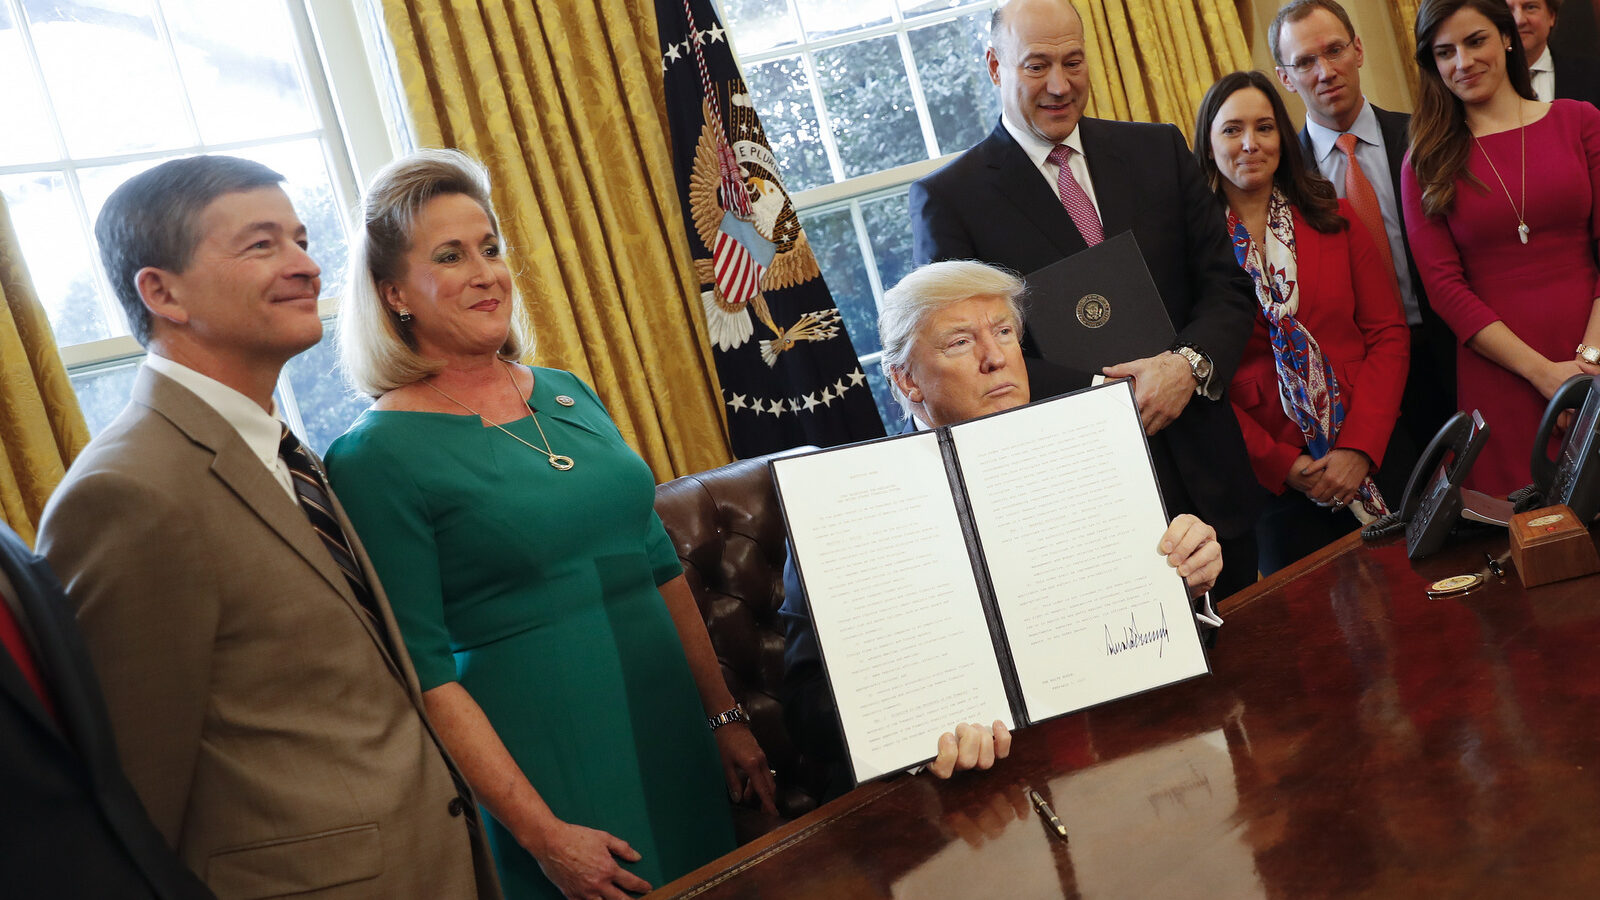 President Donald Trump holds up an executive order after his signing the order in the Oval Office of the White House in Washington, Friday, Feb. 3, 2017. The executive order that will direct the Treasury secretary to review the 2010 Dodd-Frank financial oversight law, which reshaped financial regulation after 2008-2009 crisis. On the far left are Rep. Jeb Hensarling, R-Texas, and Rep. Ann Wagner, R Mo. (AP/Pablo Martinez Monsivais)